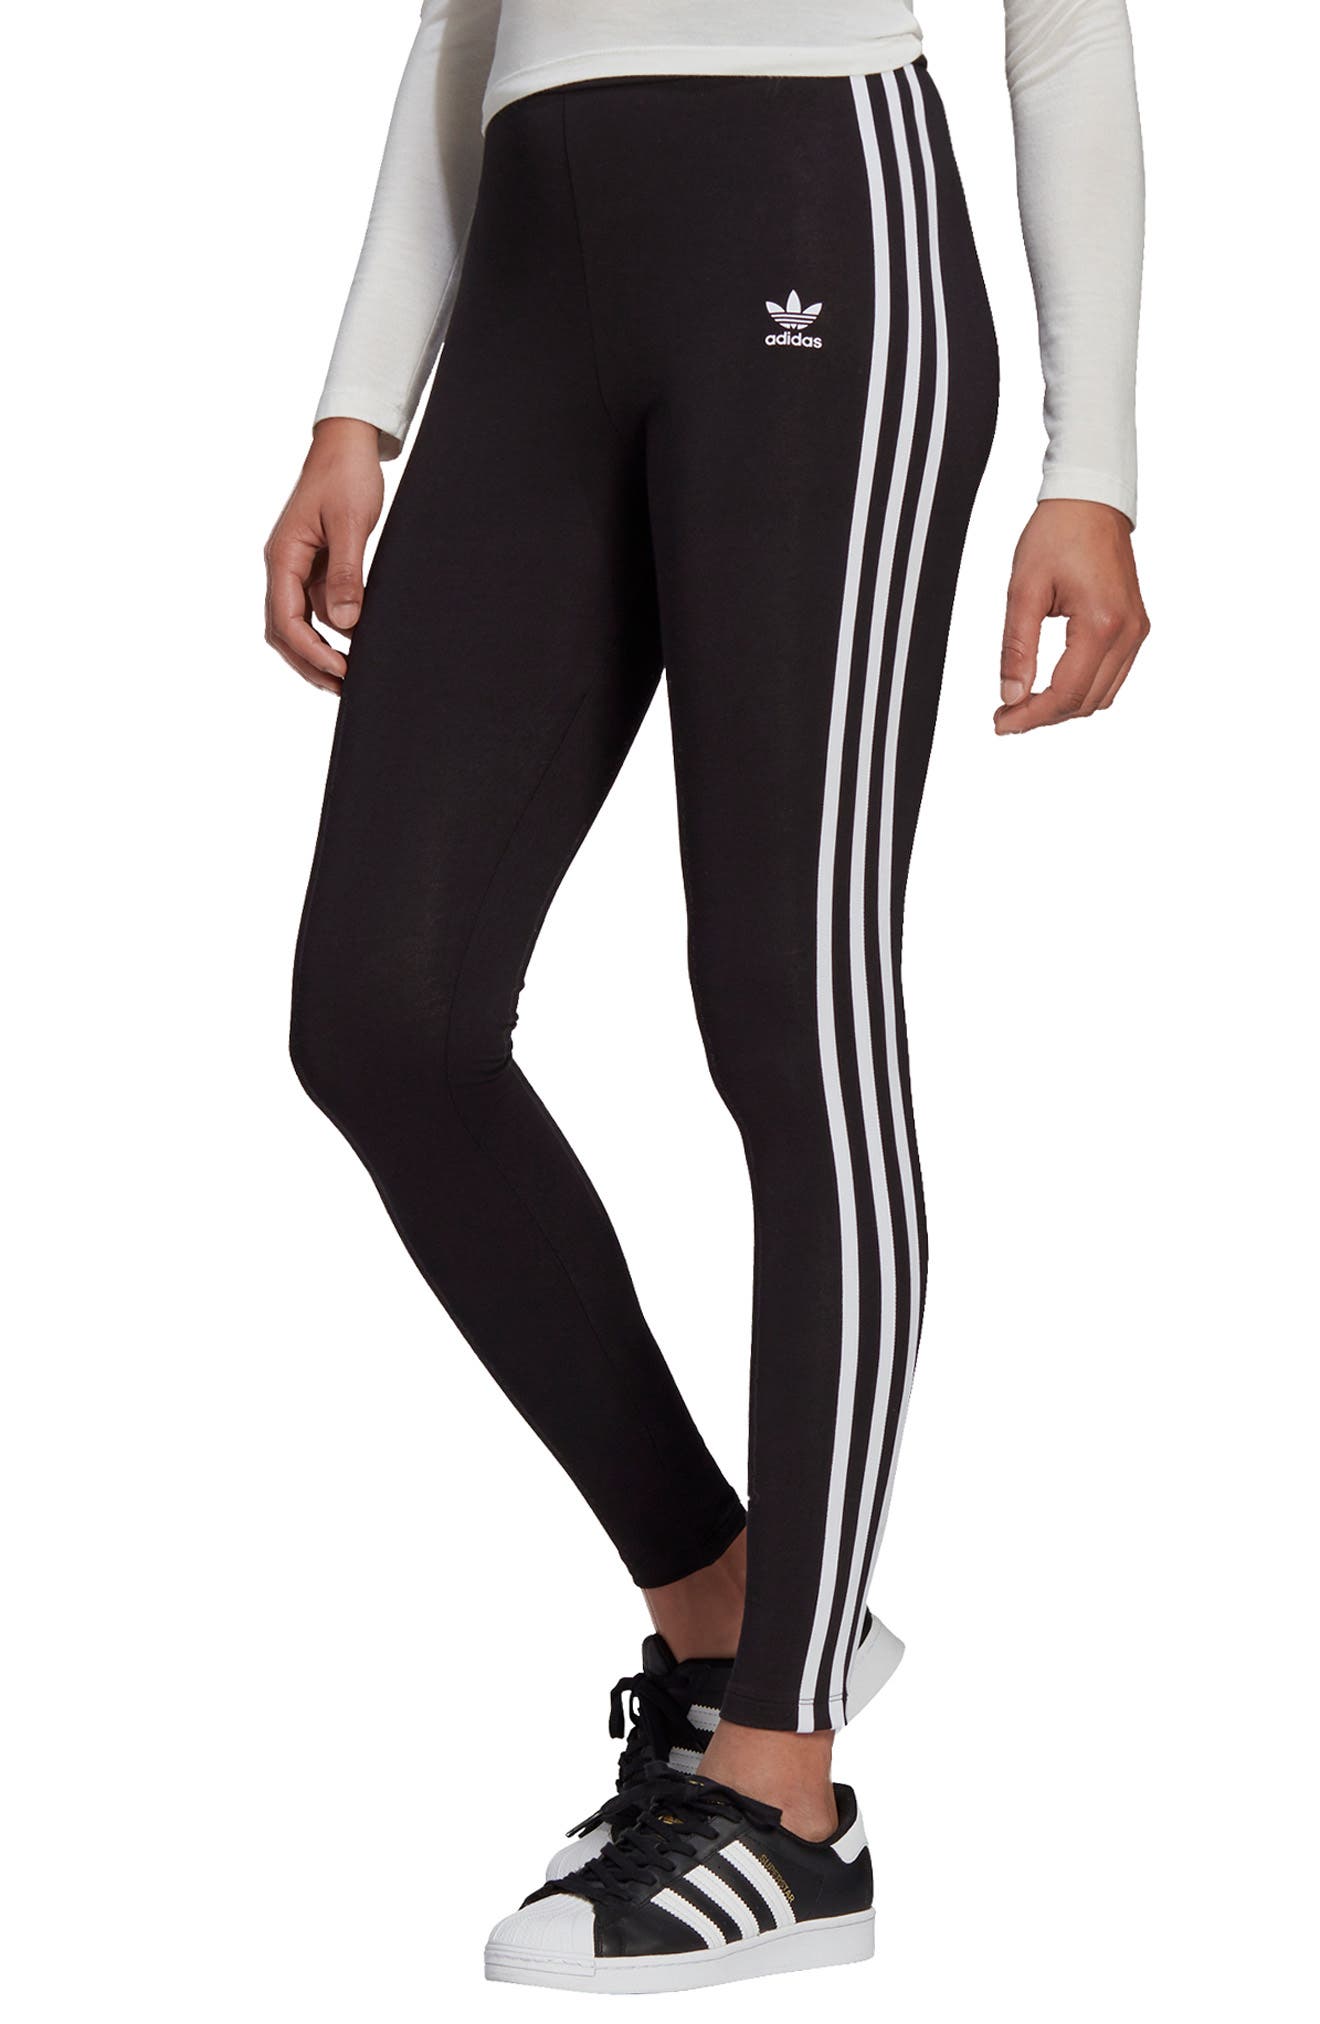 adidas tight ankle sweatpants